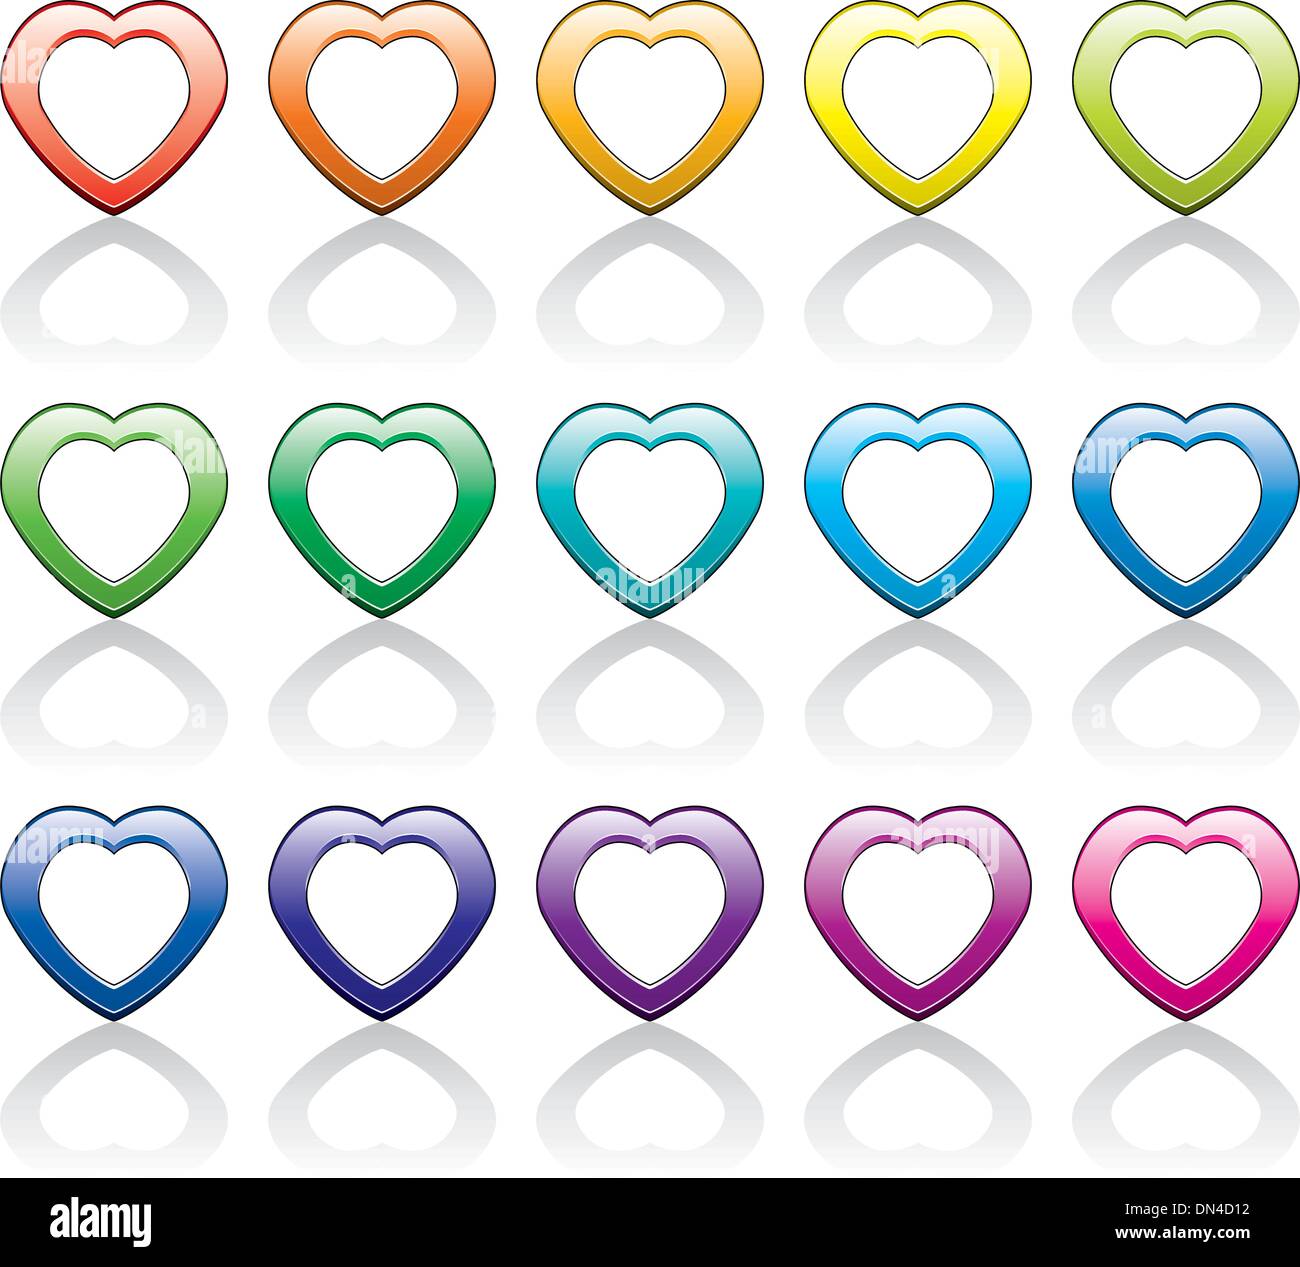 vector set of colorful heart symbols Stock Vector